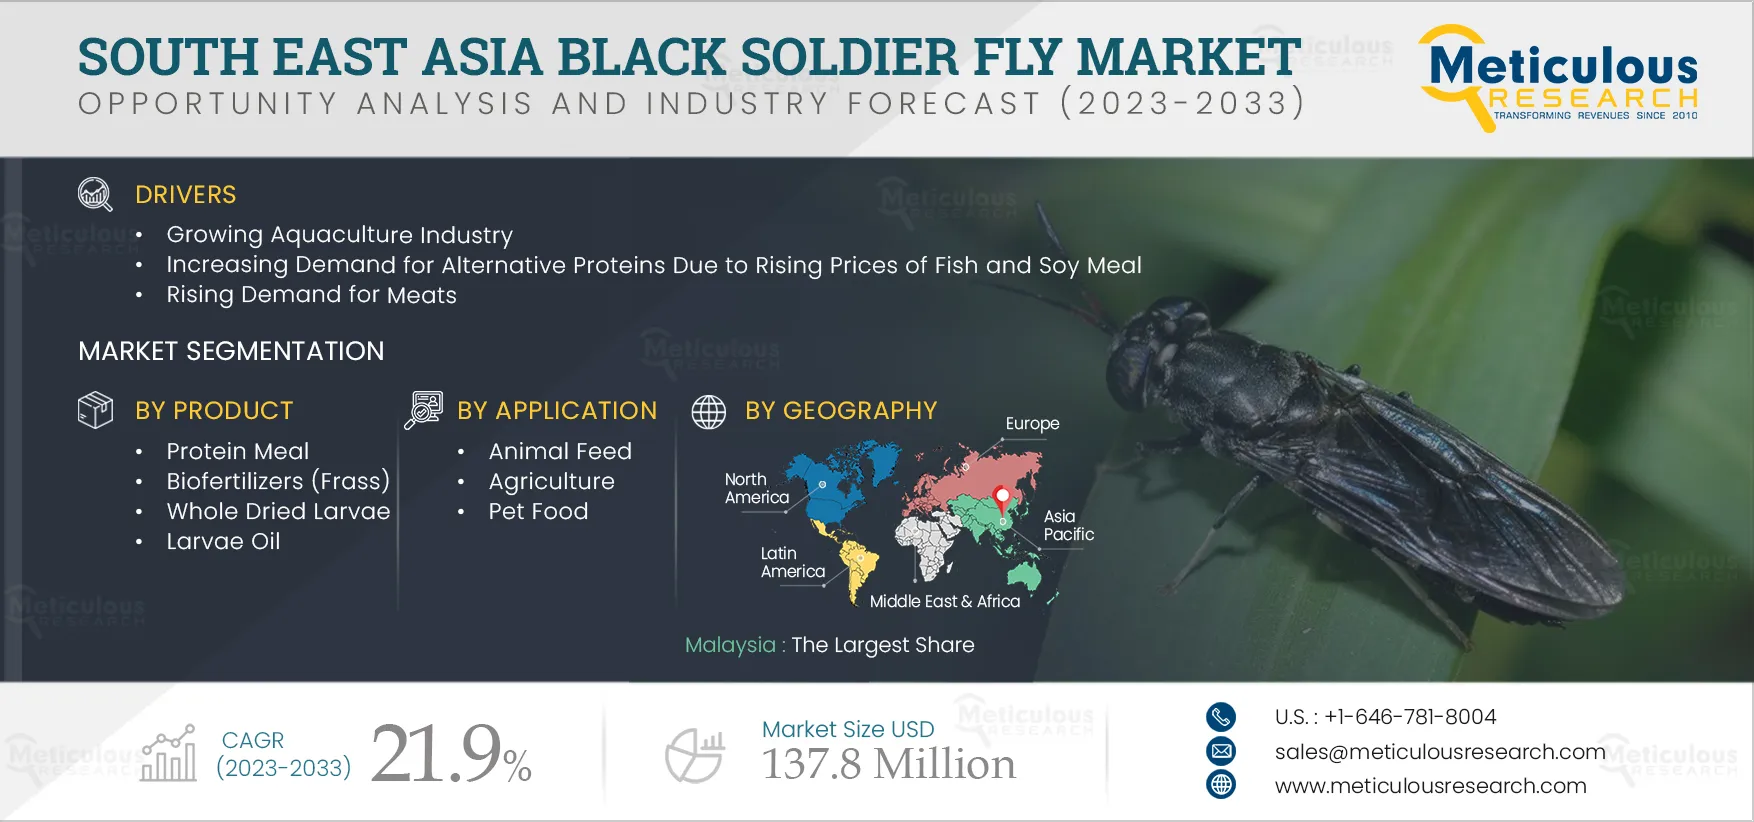 South East Asia Black Soldier Fly Market